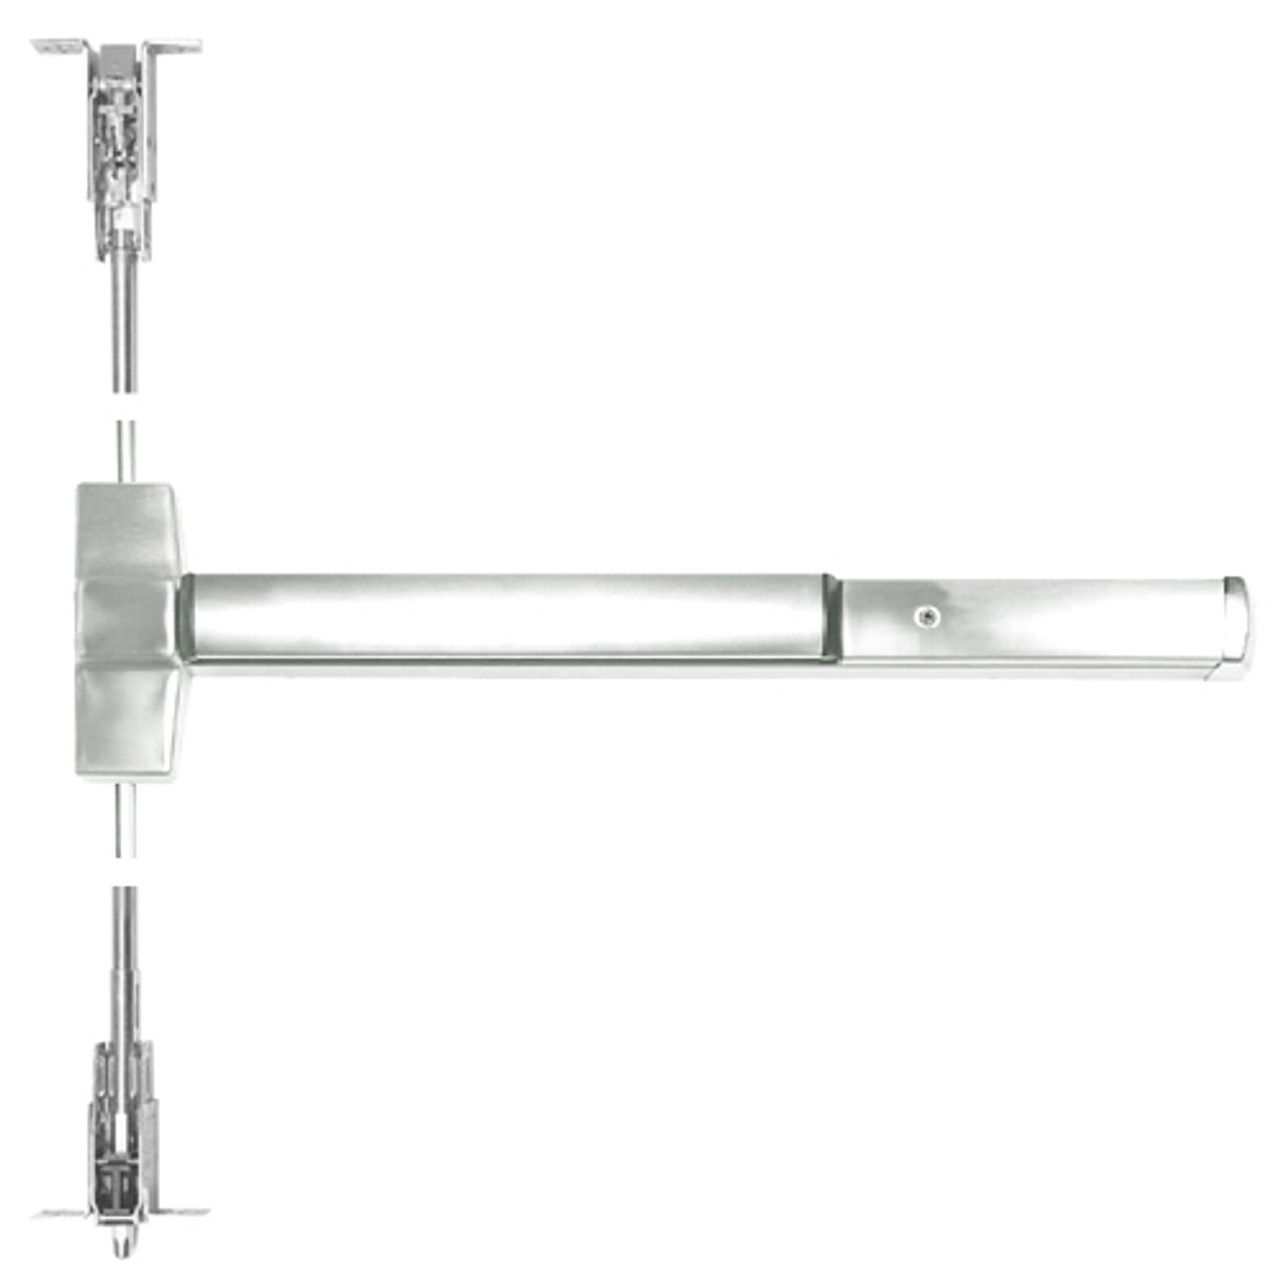 ED5860-618 Corbin ED5800 Series Non Fire Rated Concealed Vertical Rod Device in Bright Nickel Finish